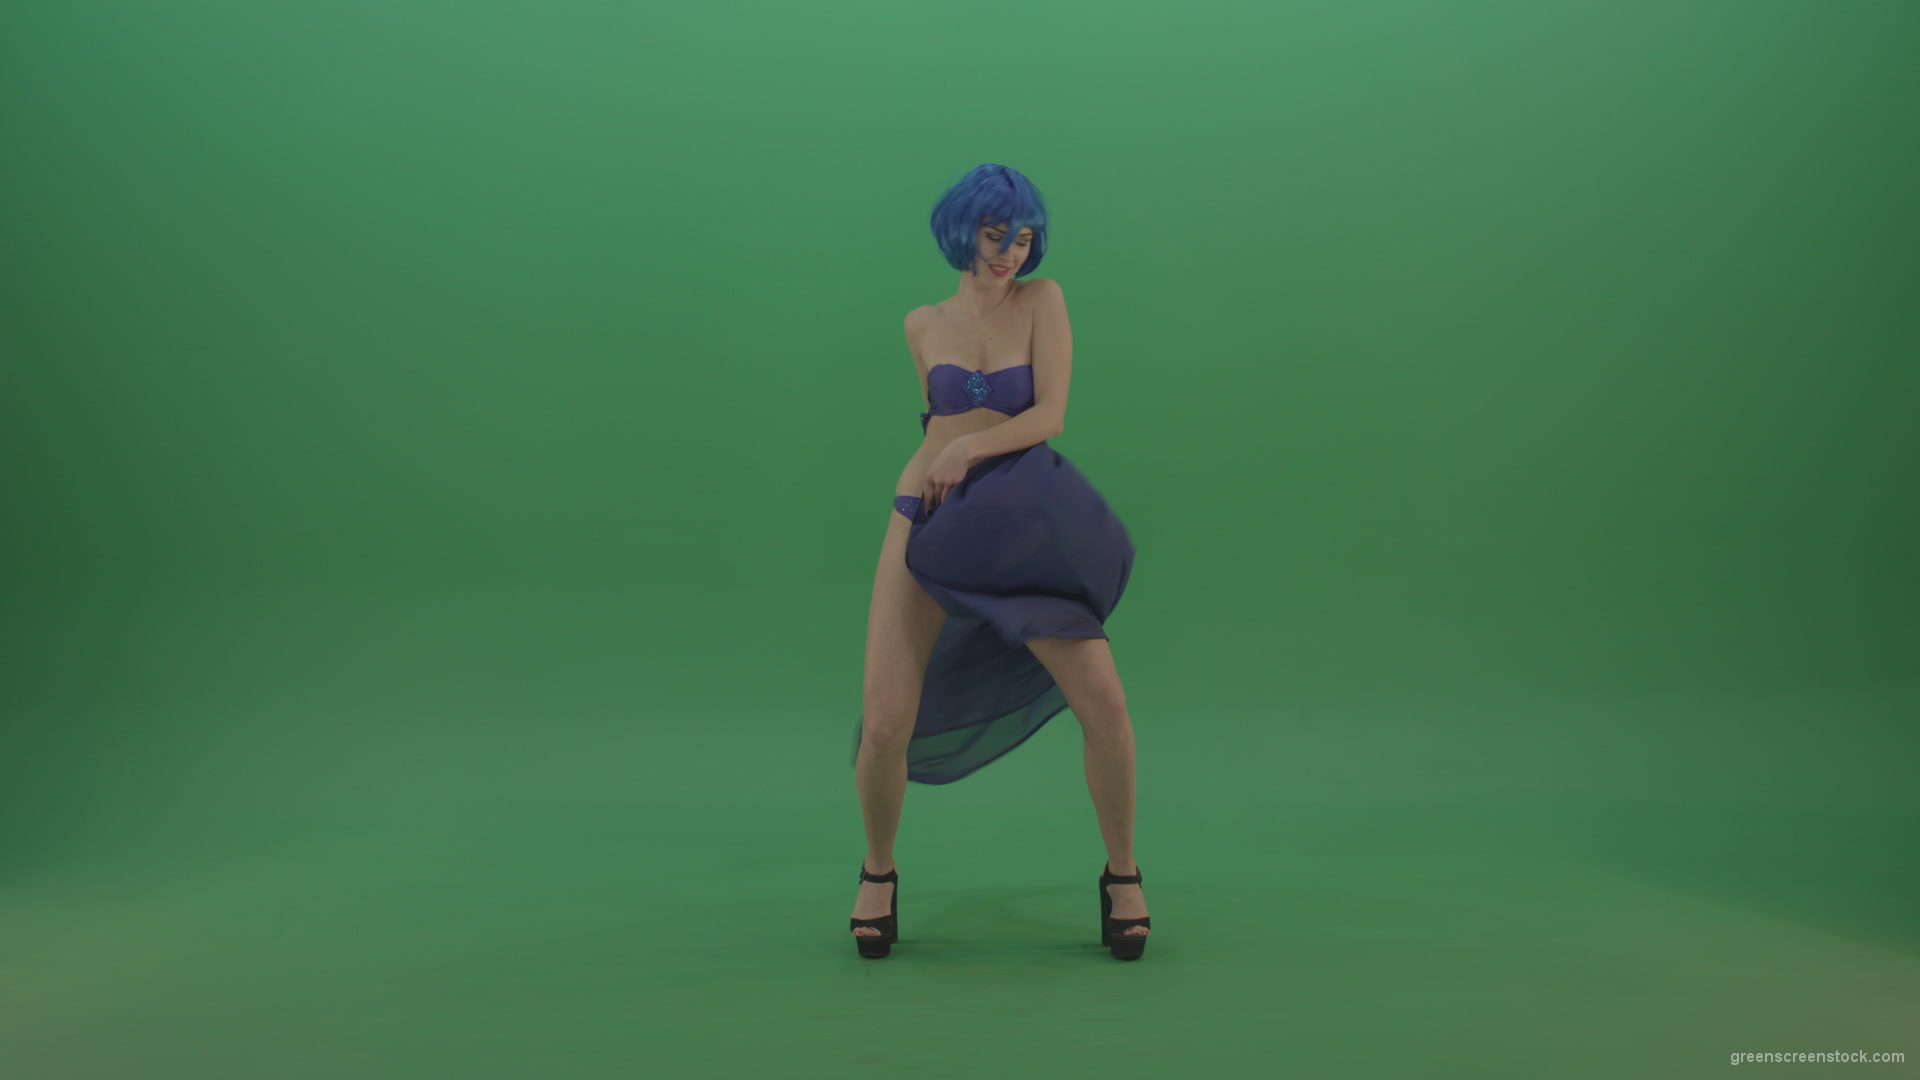 Full-size-erotic-young-girl-dancing-go-go-with-blue-dress-curtain-on-green-screen-1_007 Green Screen Stock